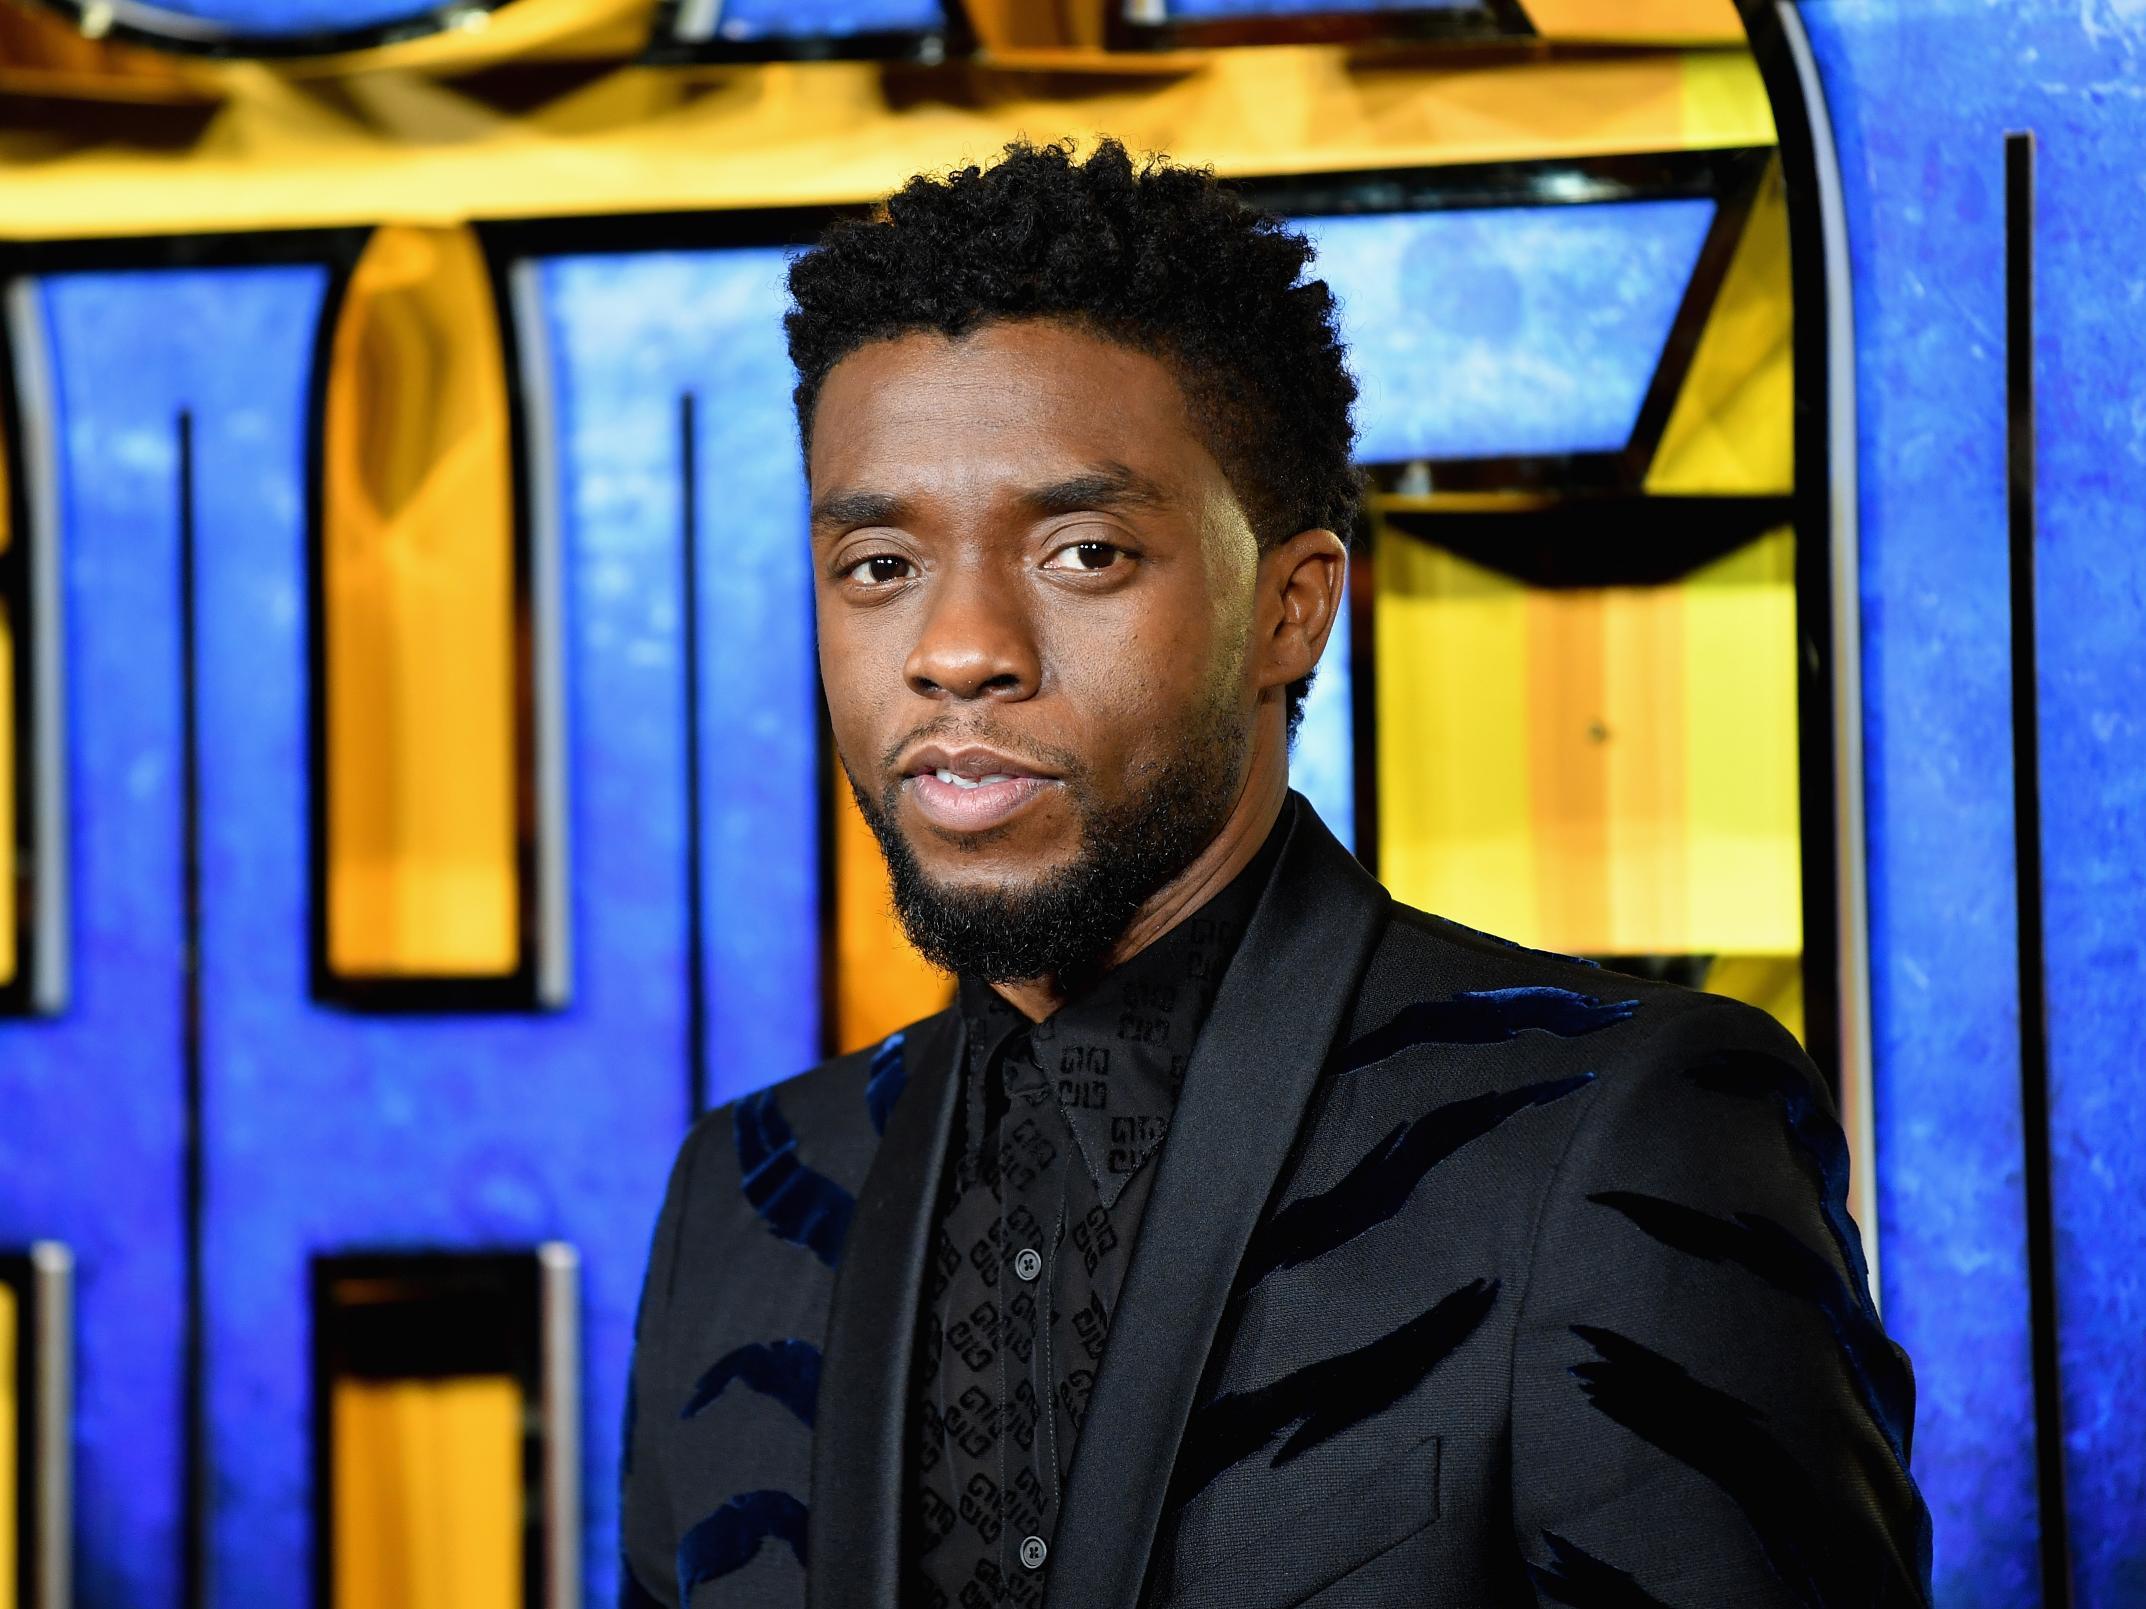 Boseman is best known for playing King T’Challa in the hit Marvel movies